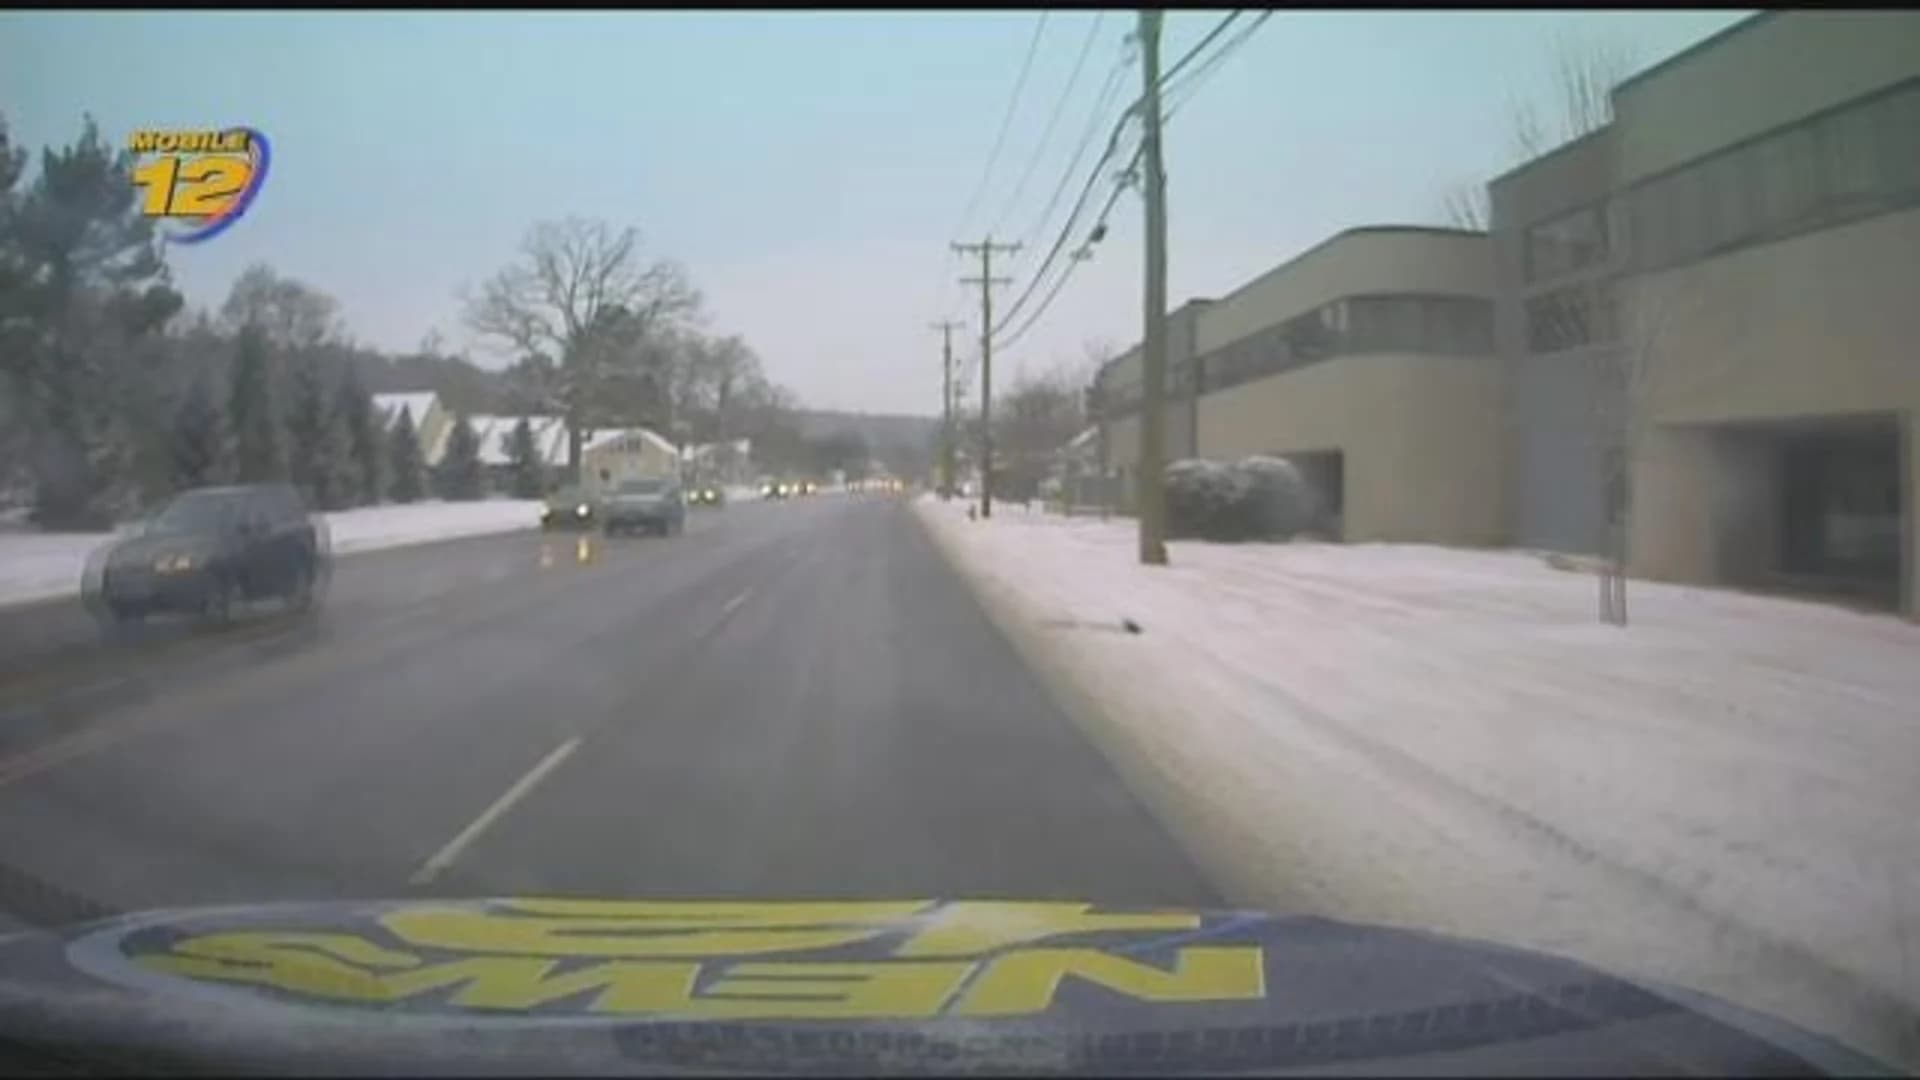 Mobile 12 in Wilton: Fast moving snow blankets region